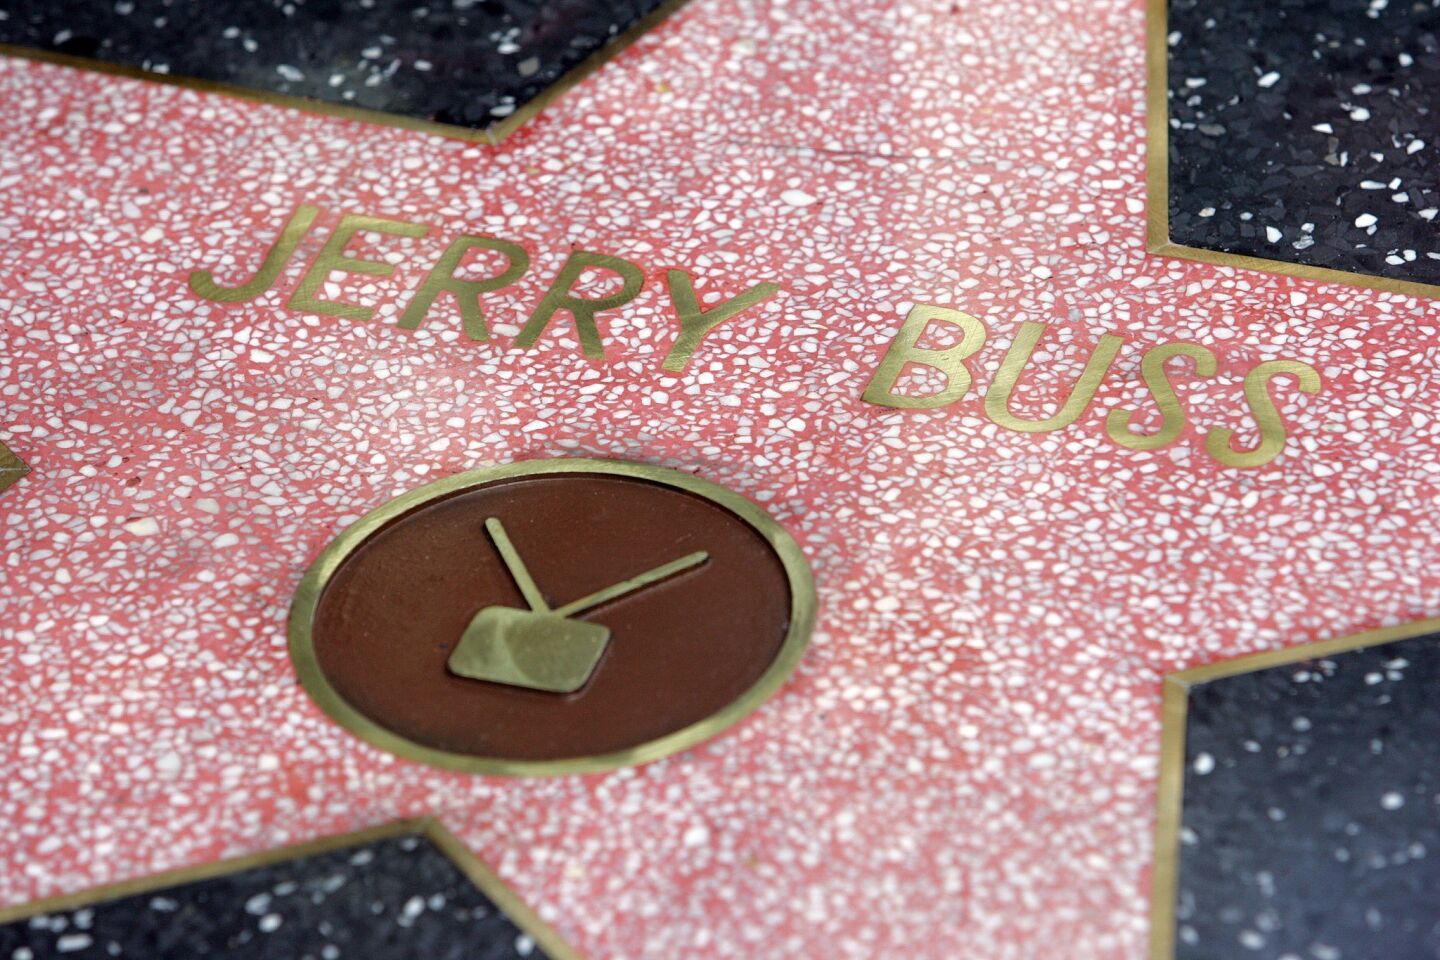 A look at Jerry Buss' star on the Hollywood Walk of Fame. He was honored for his work as a television producer and for creating the concept of regional programming.